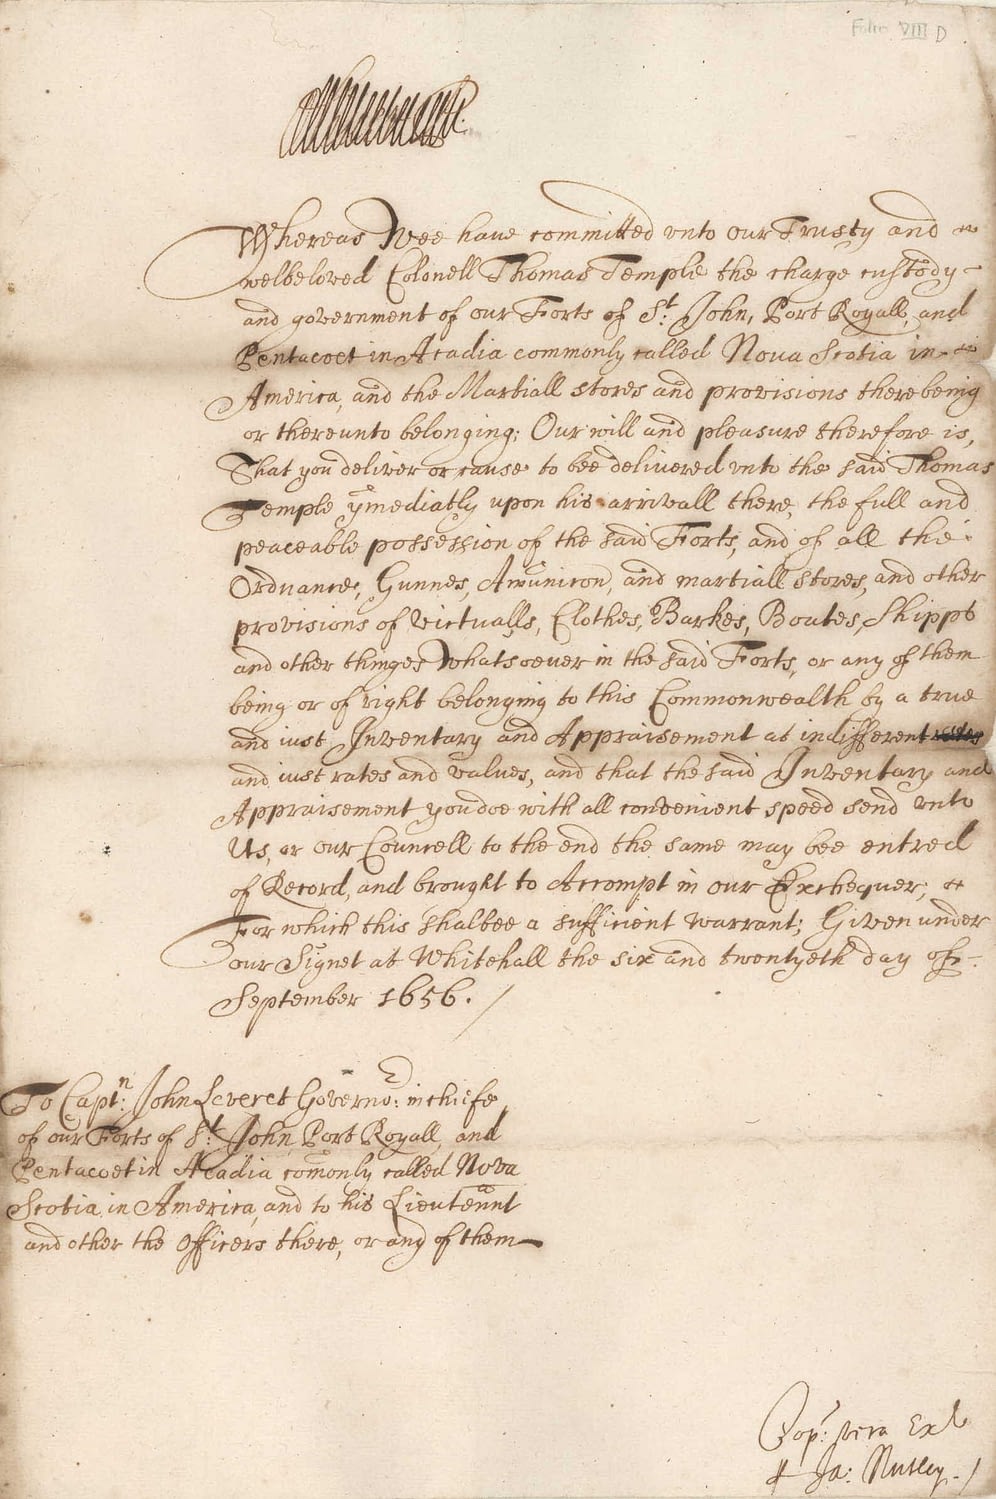 Instructions from Oliver Cromwell to John Leverett (written by James Nutley), 26 September 1656